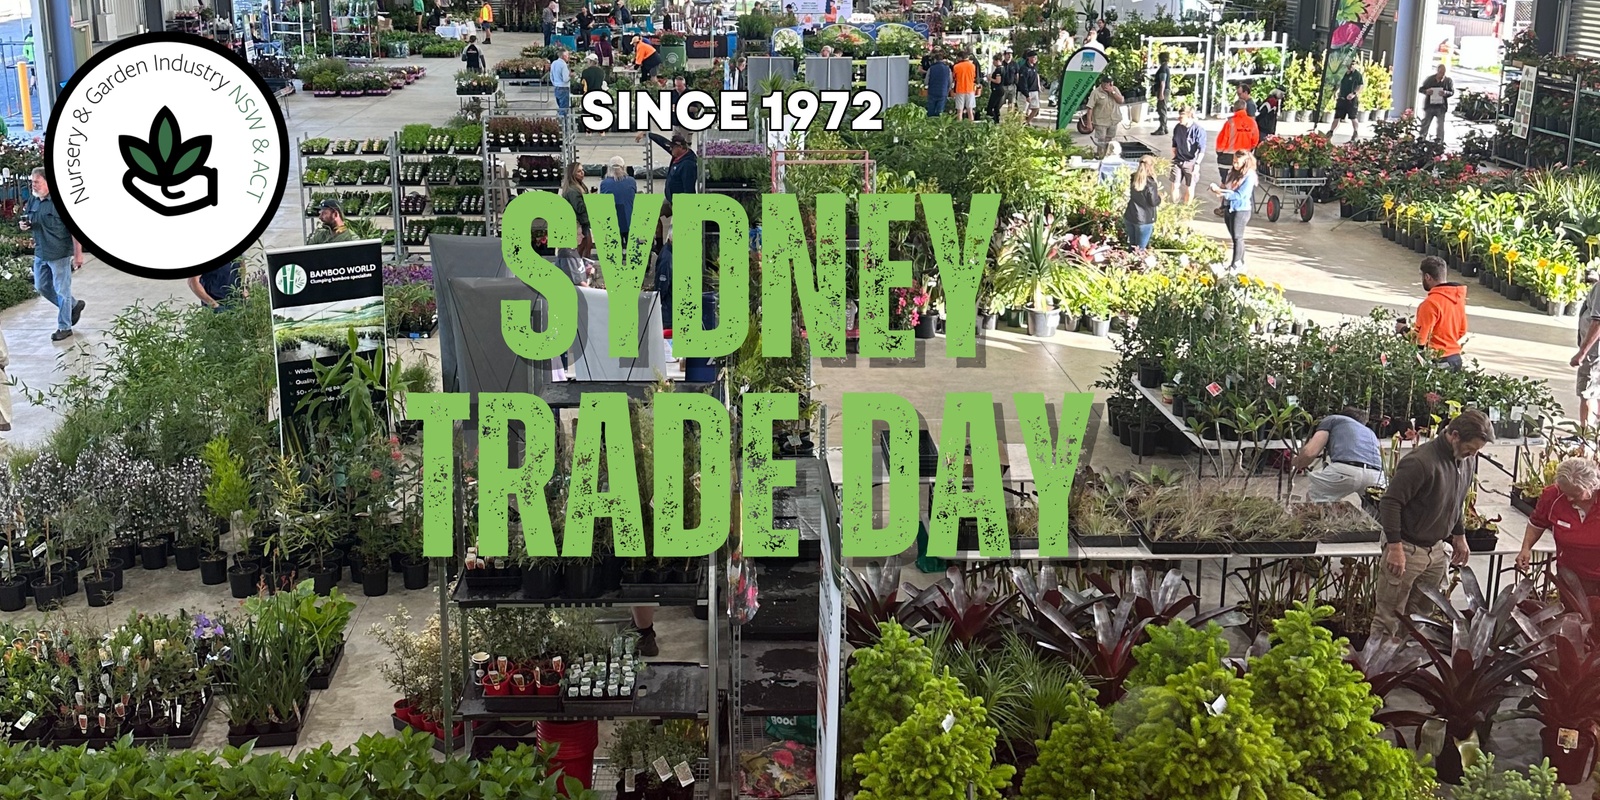 Banner image for NGINA Members - Sydney Trade Day Casual  Stands